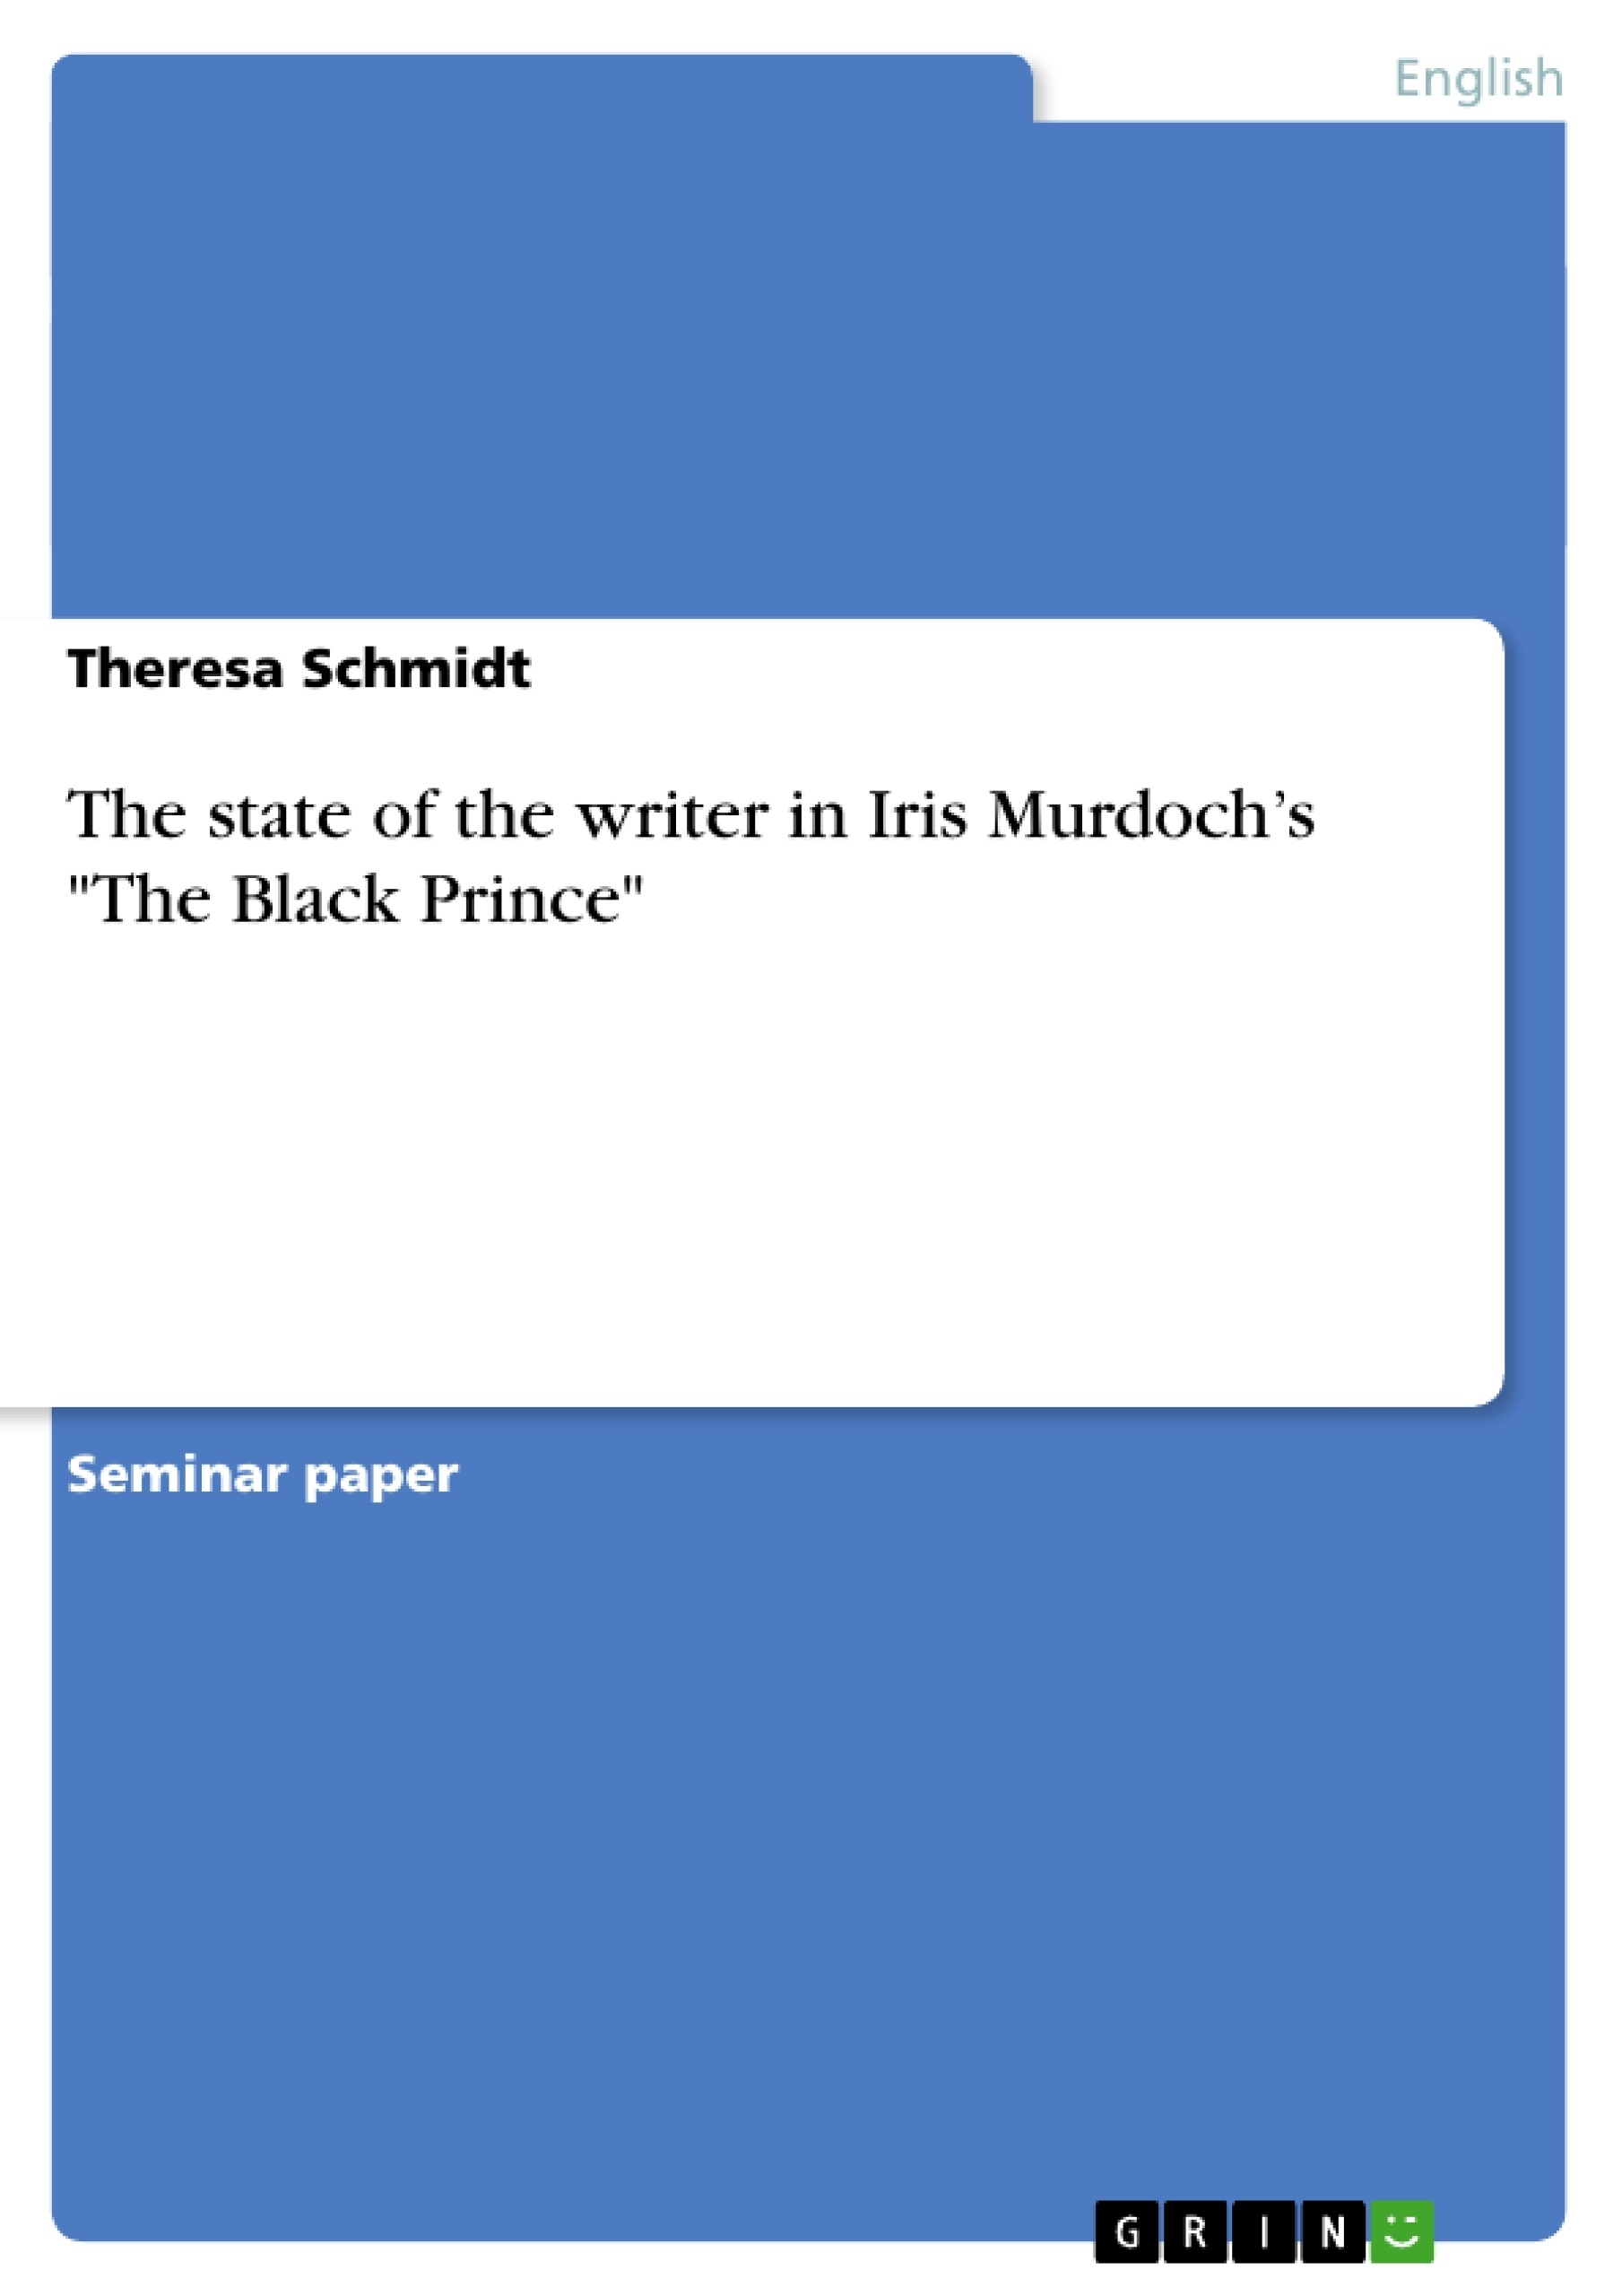 Title: The state of the writer in Iris Murdoch’s "The Black Prince"